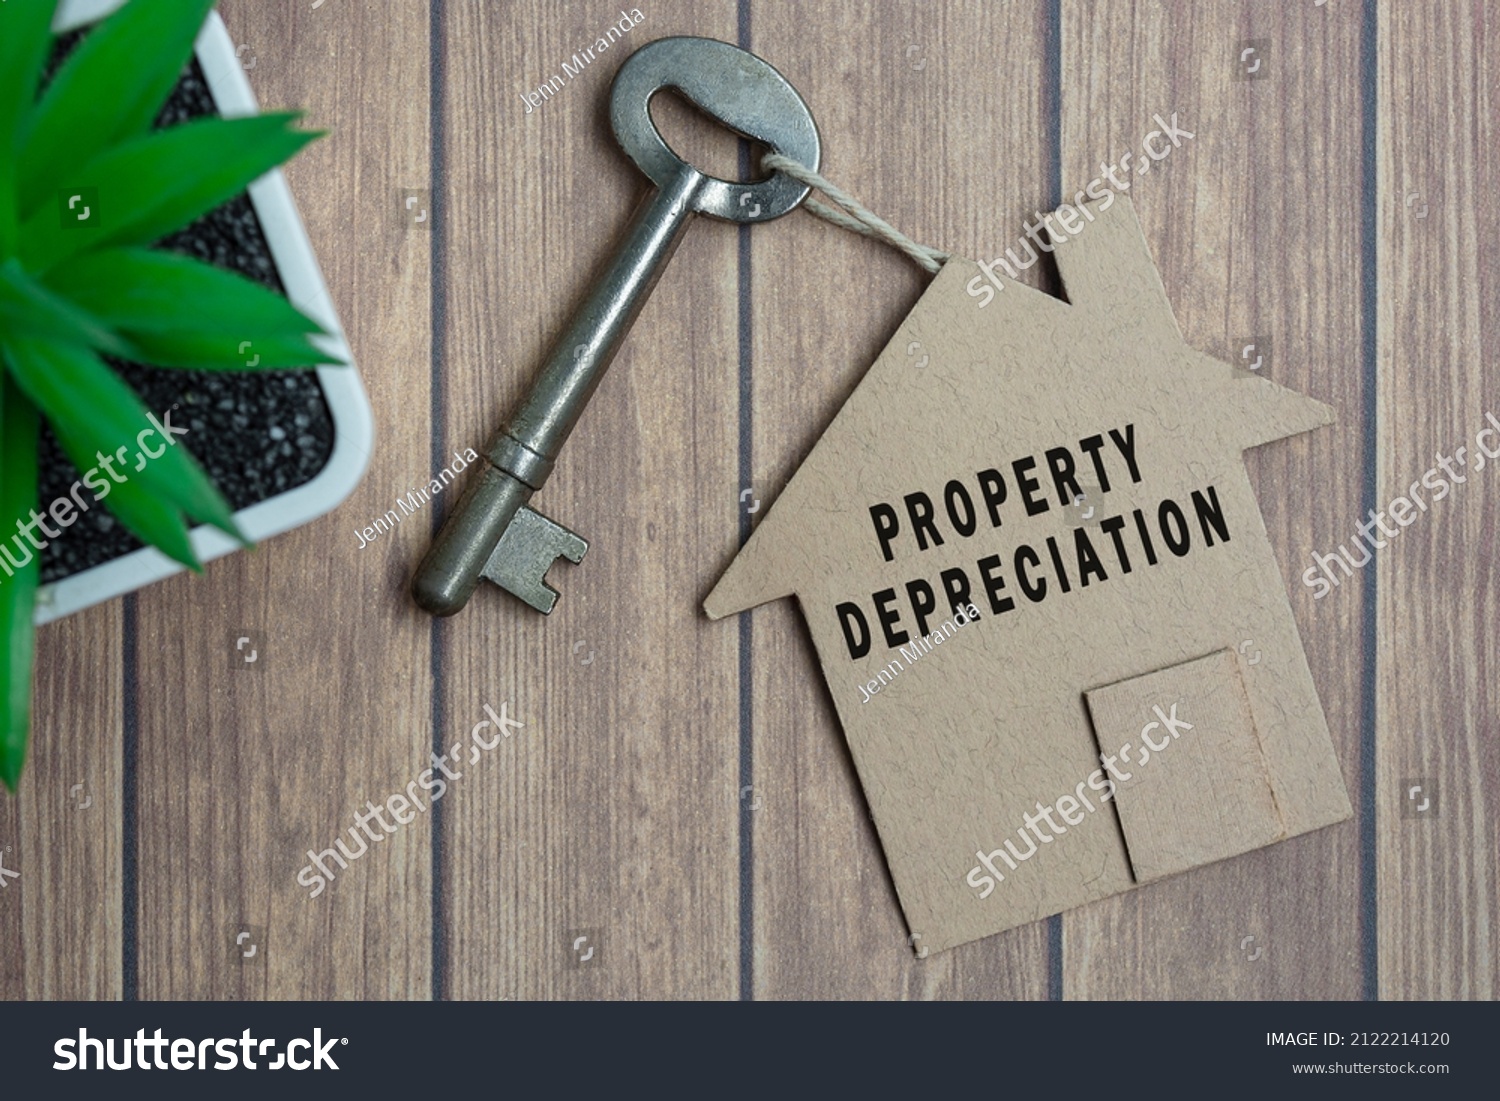 Property depreciation text on house model and key on wooden desk #2122214120